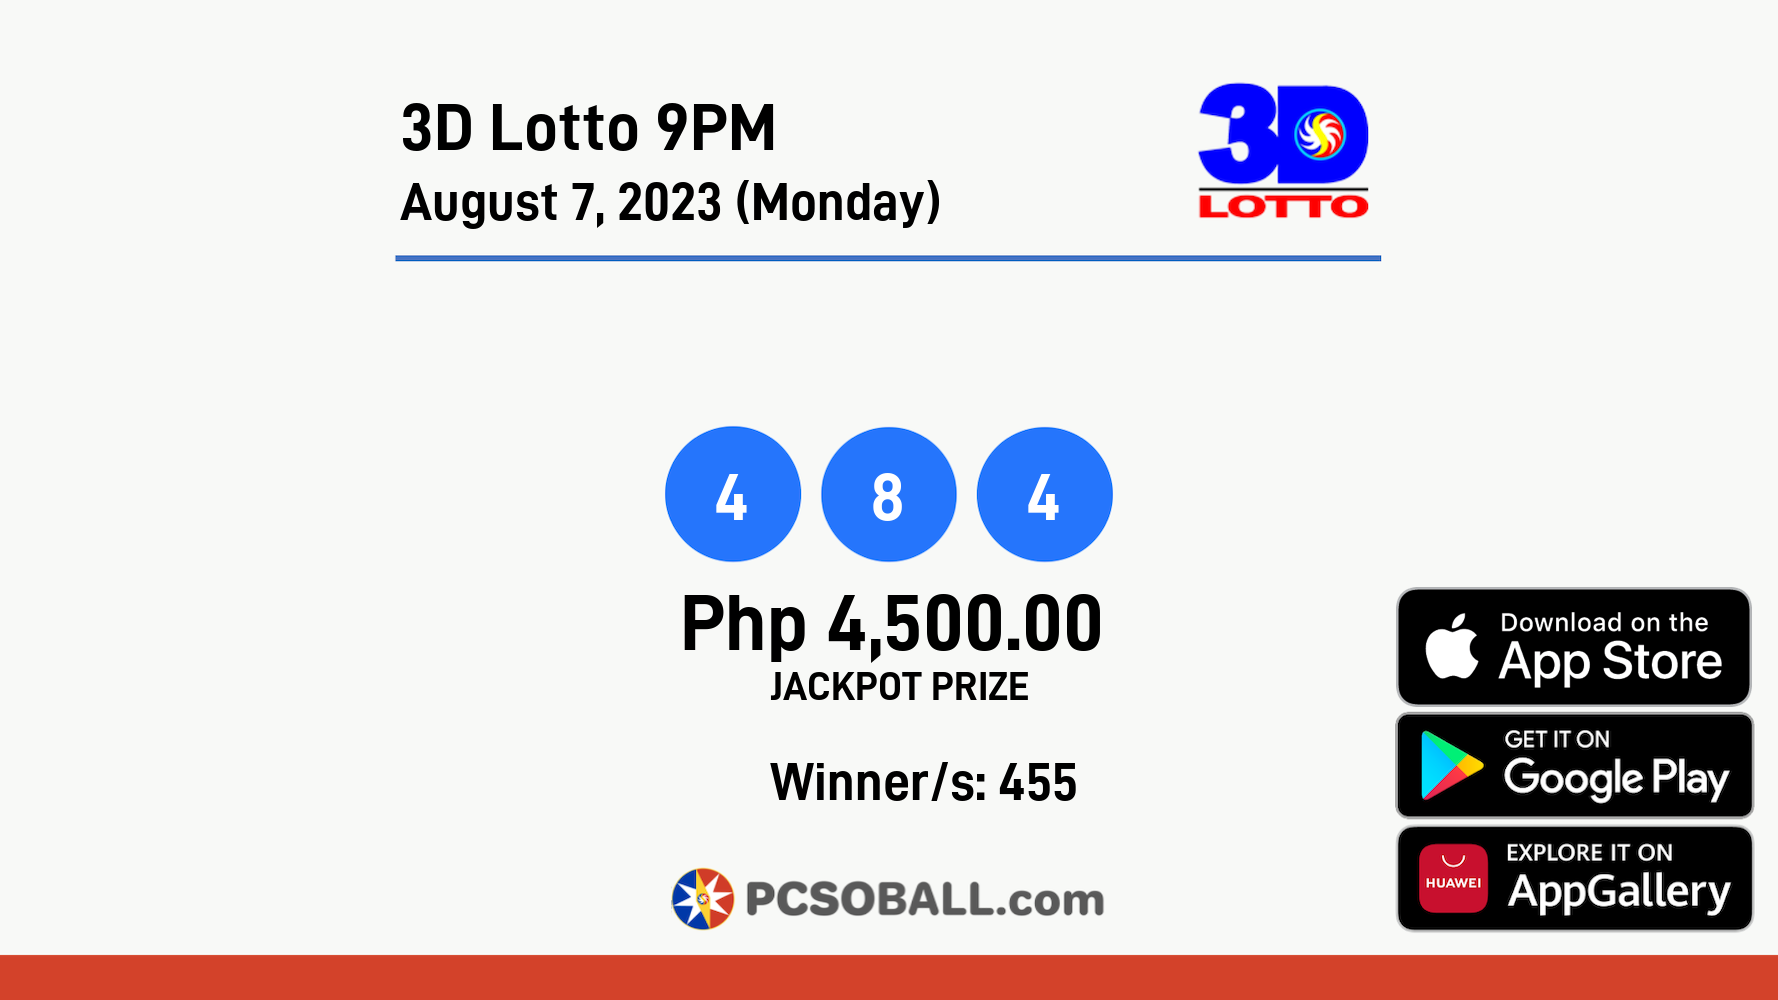 3D Lotto 9PM August 7, 2023 (Monday) Result